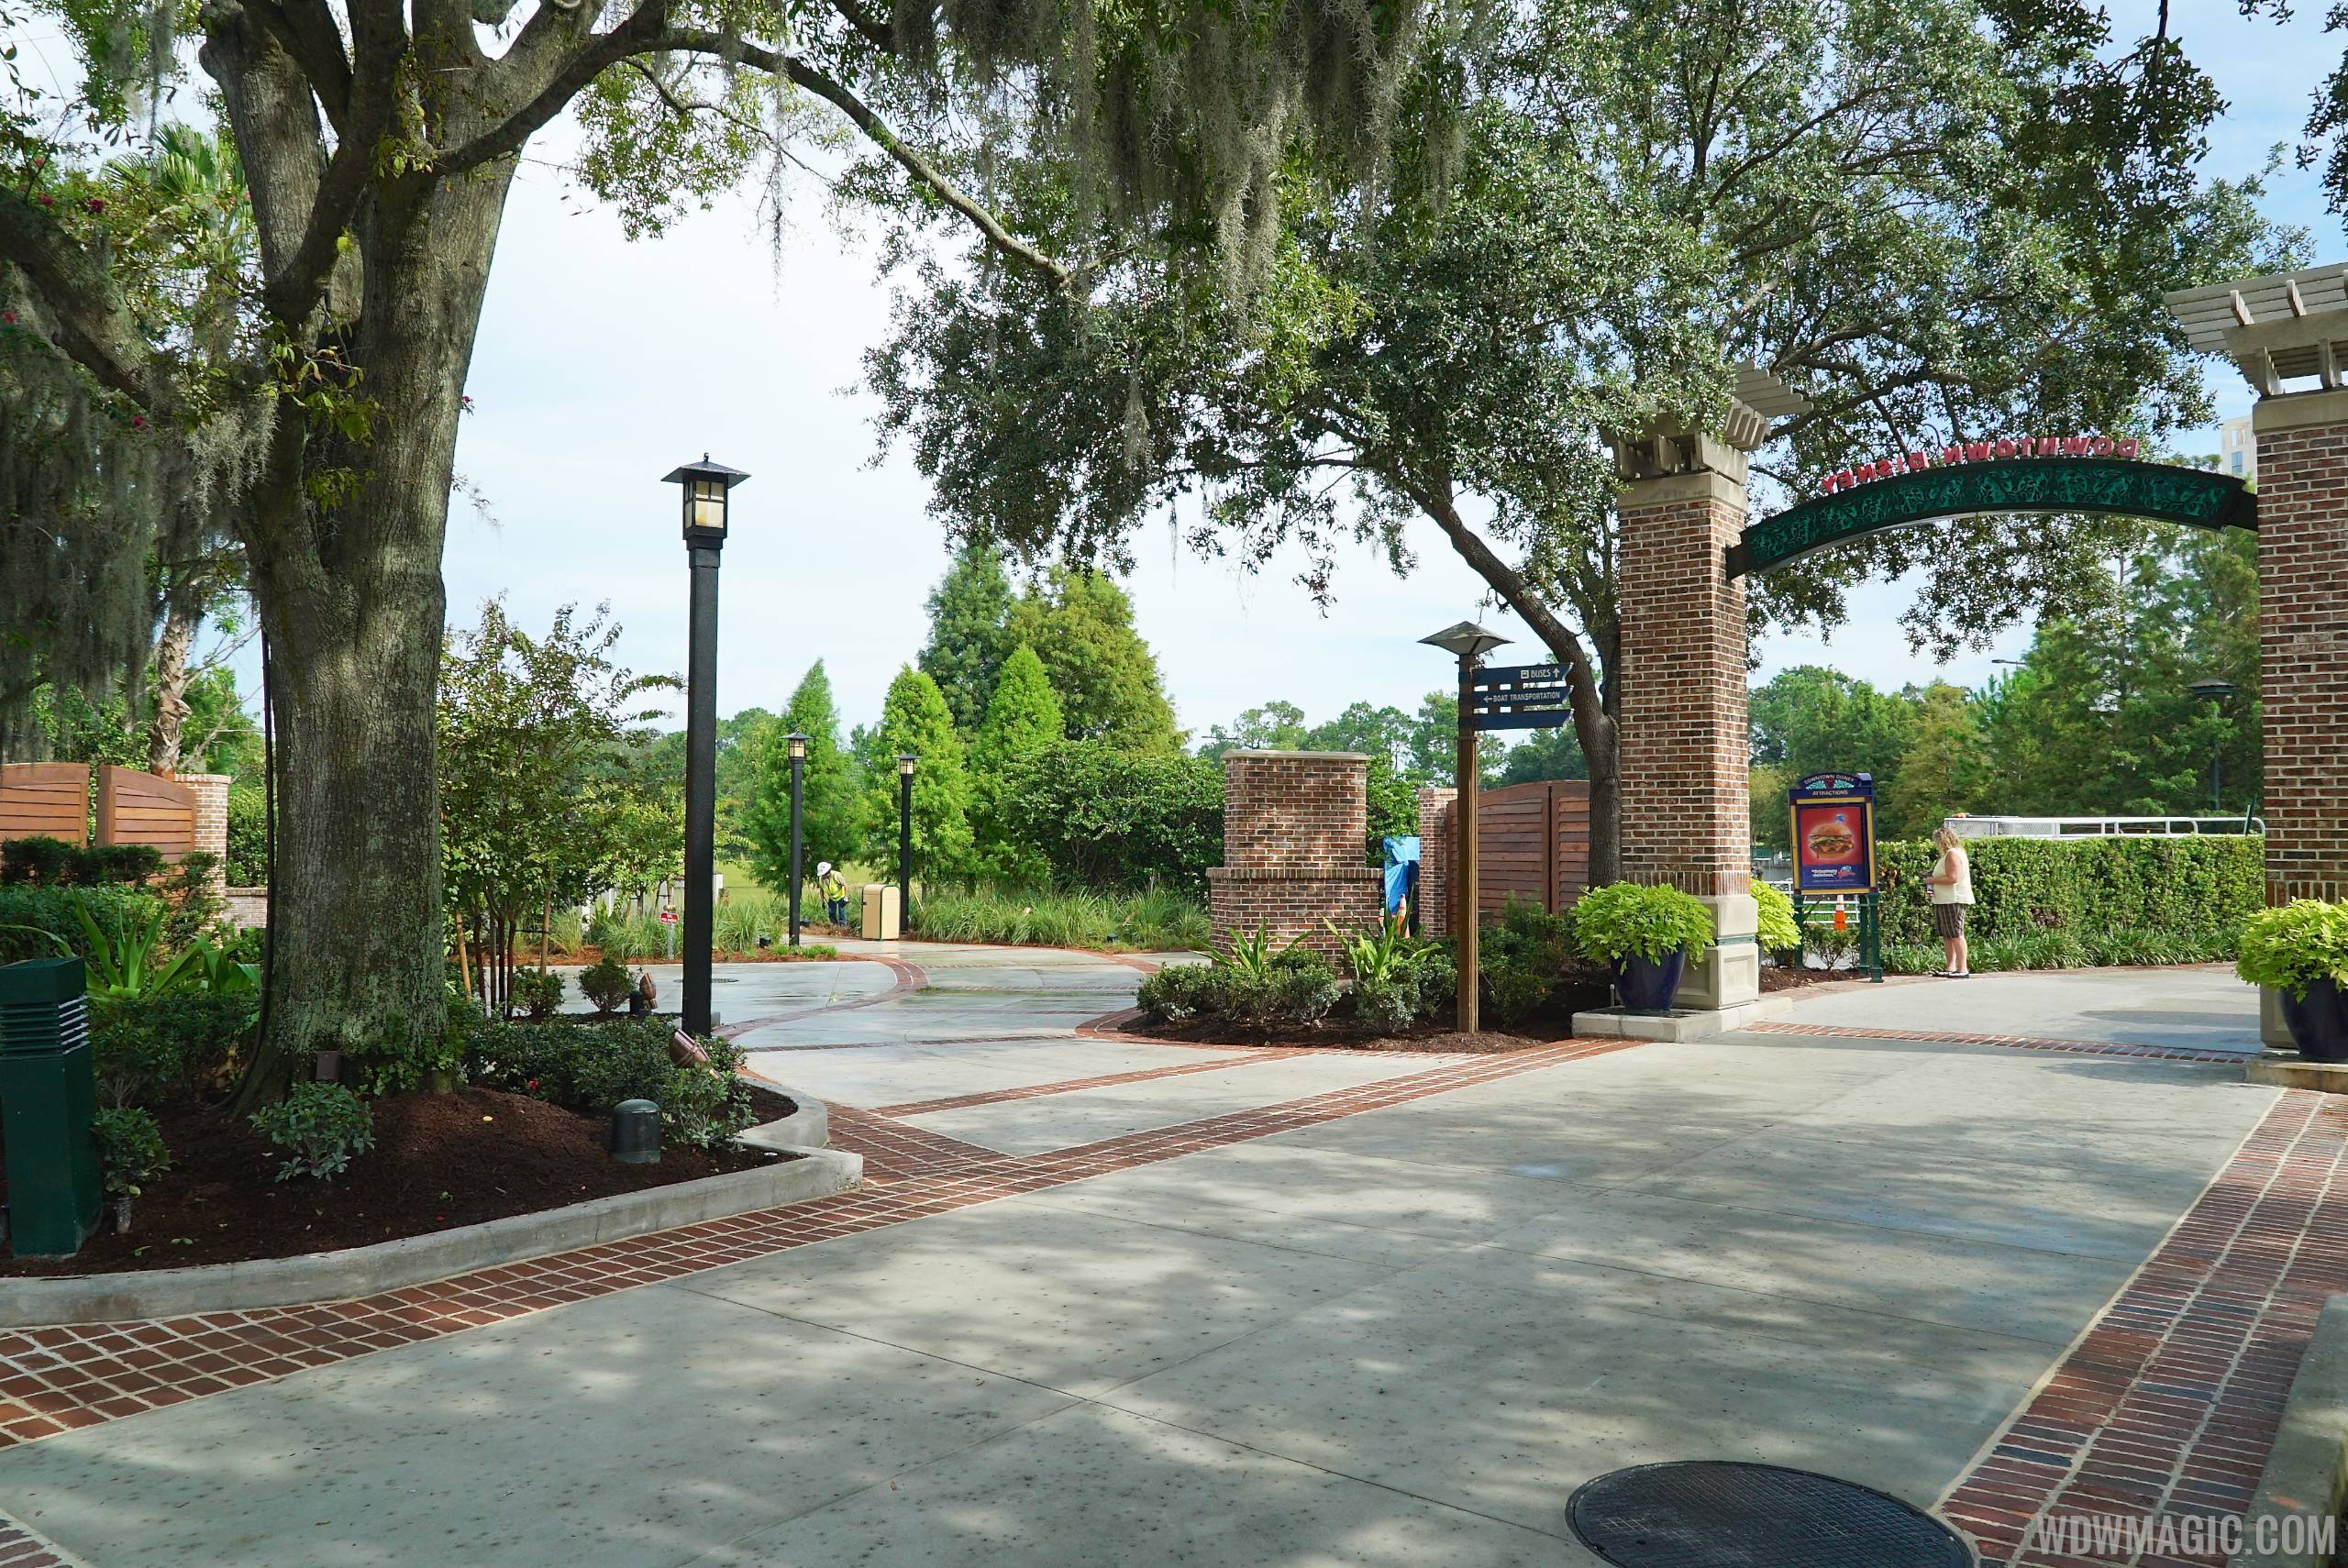 Entrance to the new Marketplace bridge and boat dock